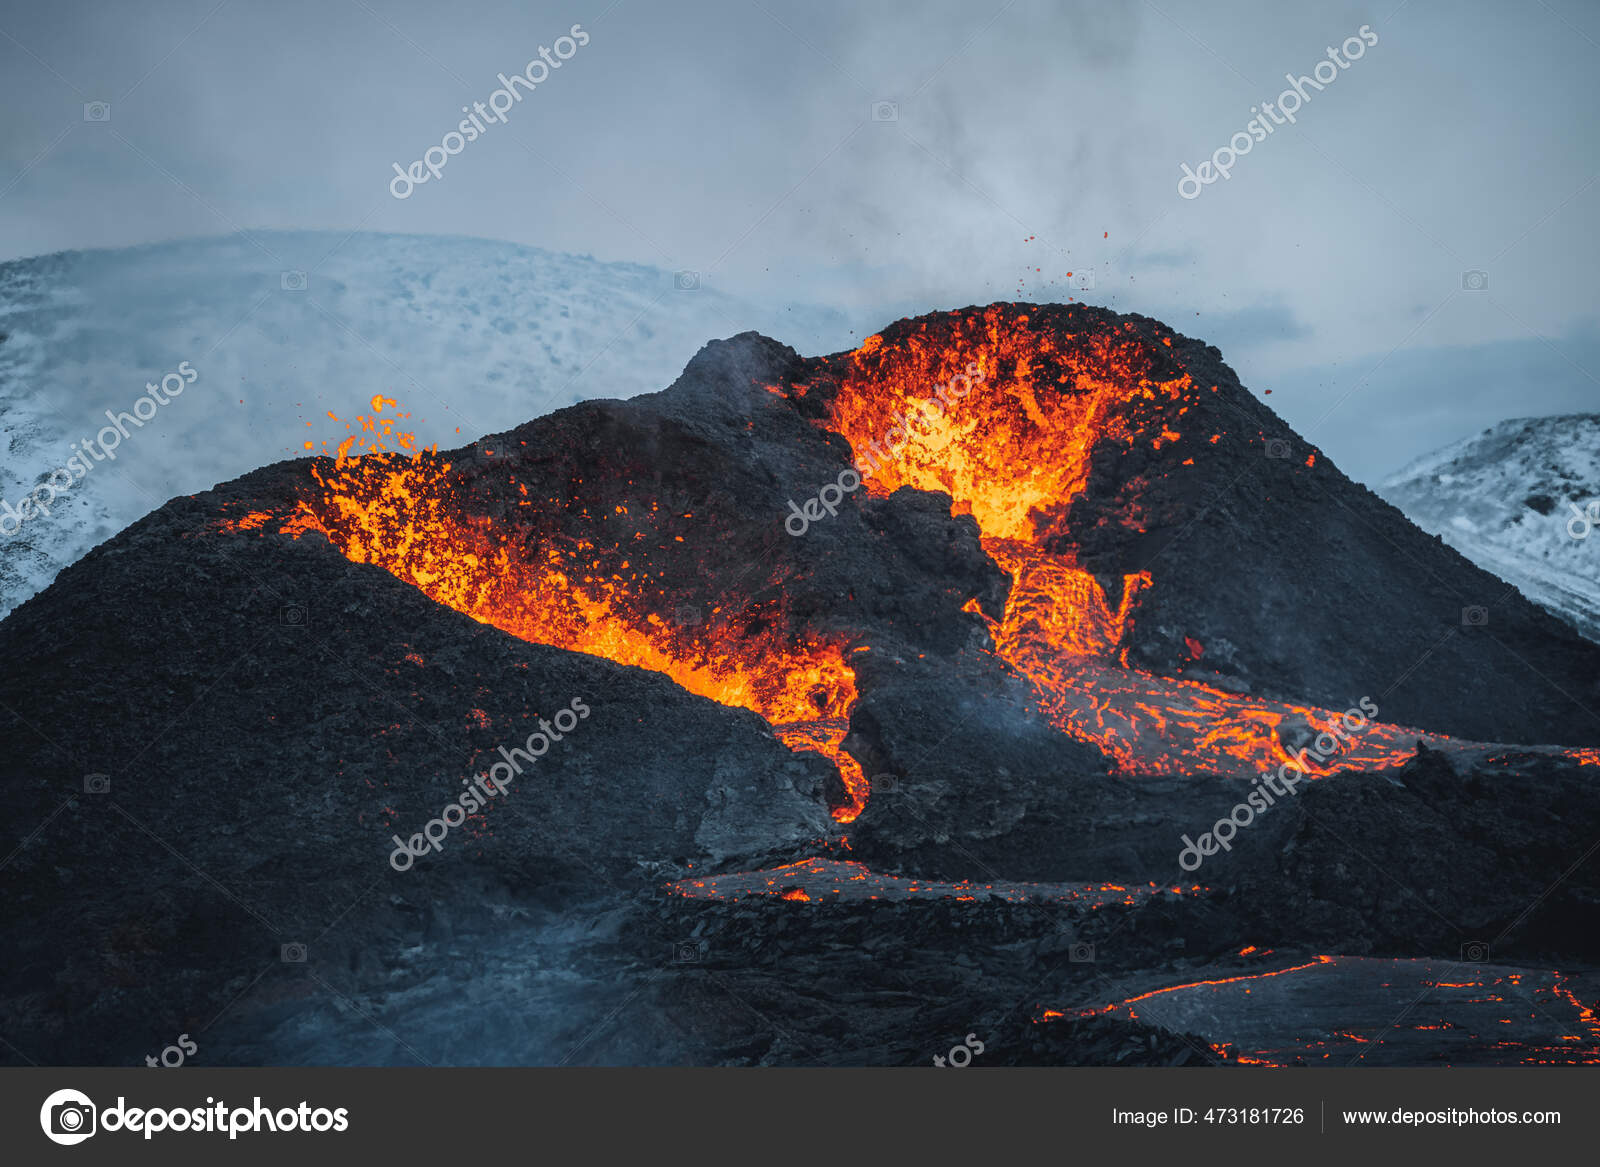 Hot　by　The　out　is　lava　the　volcano　close　valley　eruption　magma　of　Grindavik　©mathias_berlin　the　2021.　in　and　and　Photo　Fagradalsfjall　to　Stock　located　473181726　coming　crater.　Geldingadalir　Volcanic　Iceland　Reykjavik.